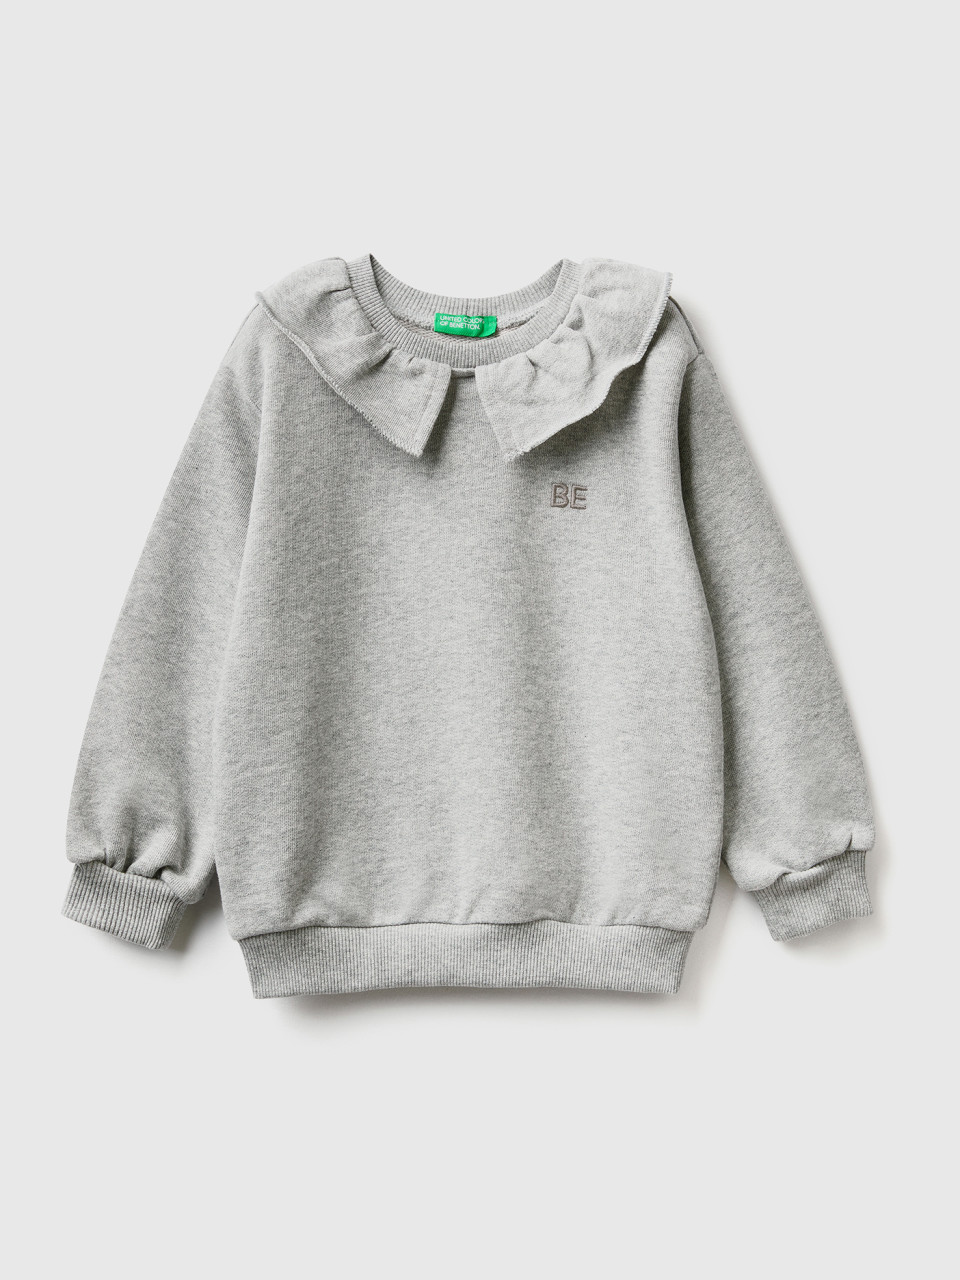 Benetton, Sweatshirt With Collar And be Embroidery, Light Gray, Kids